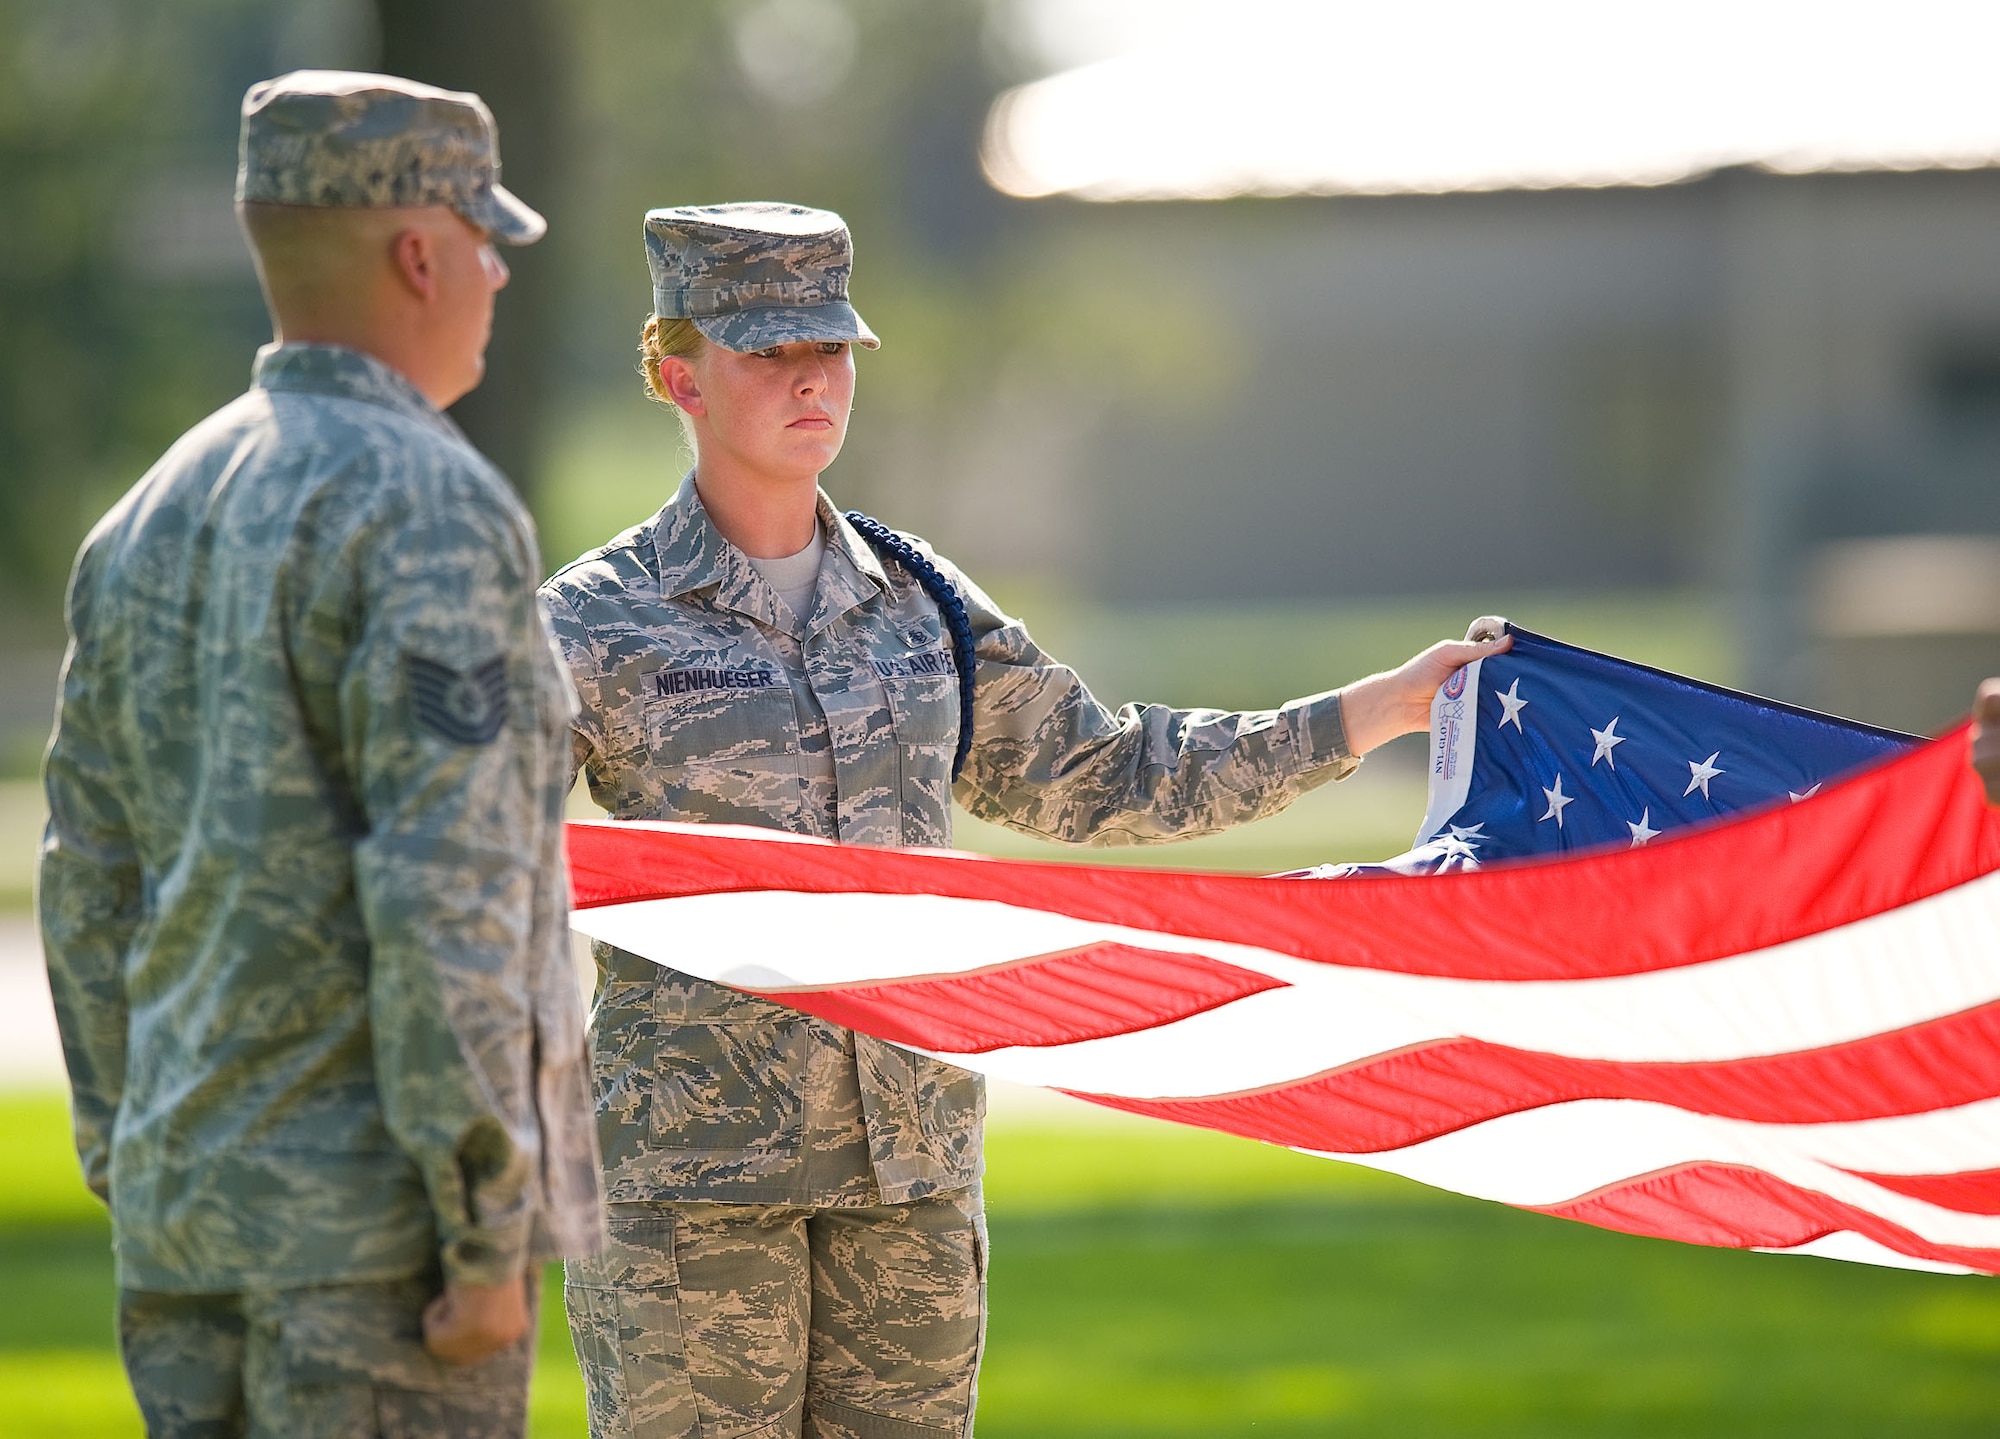 Staff Sgt. Jessica Nienhueser, right, a military training leader assigned to Detachment 3, 373rd Training Squadron, Dover Air Force Base, Del., prepares the American flag for folding during a retreat ceremony at the base flag pole Sept. 7, 2012, at Dover AFB. (U.S. Air Force photo by Roland Balik)
